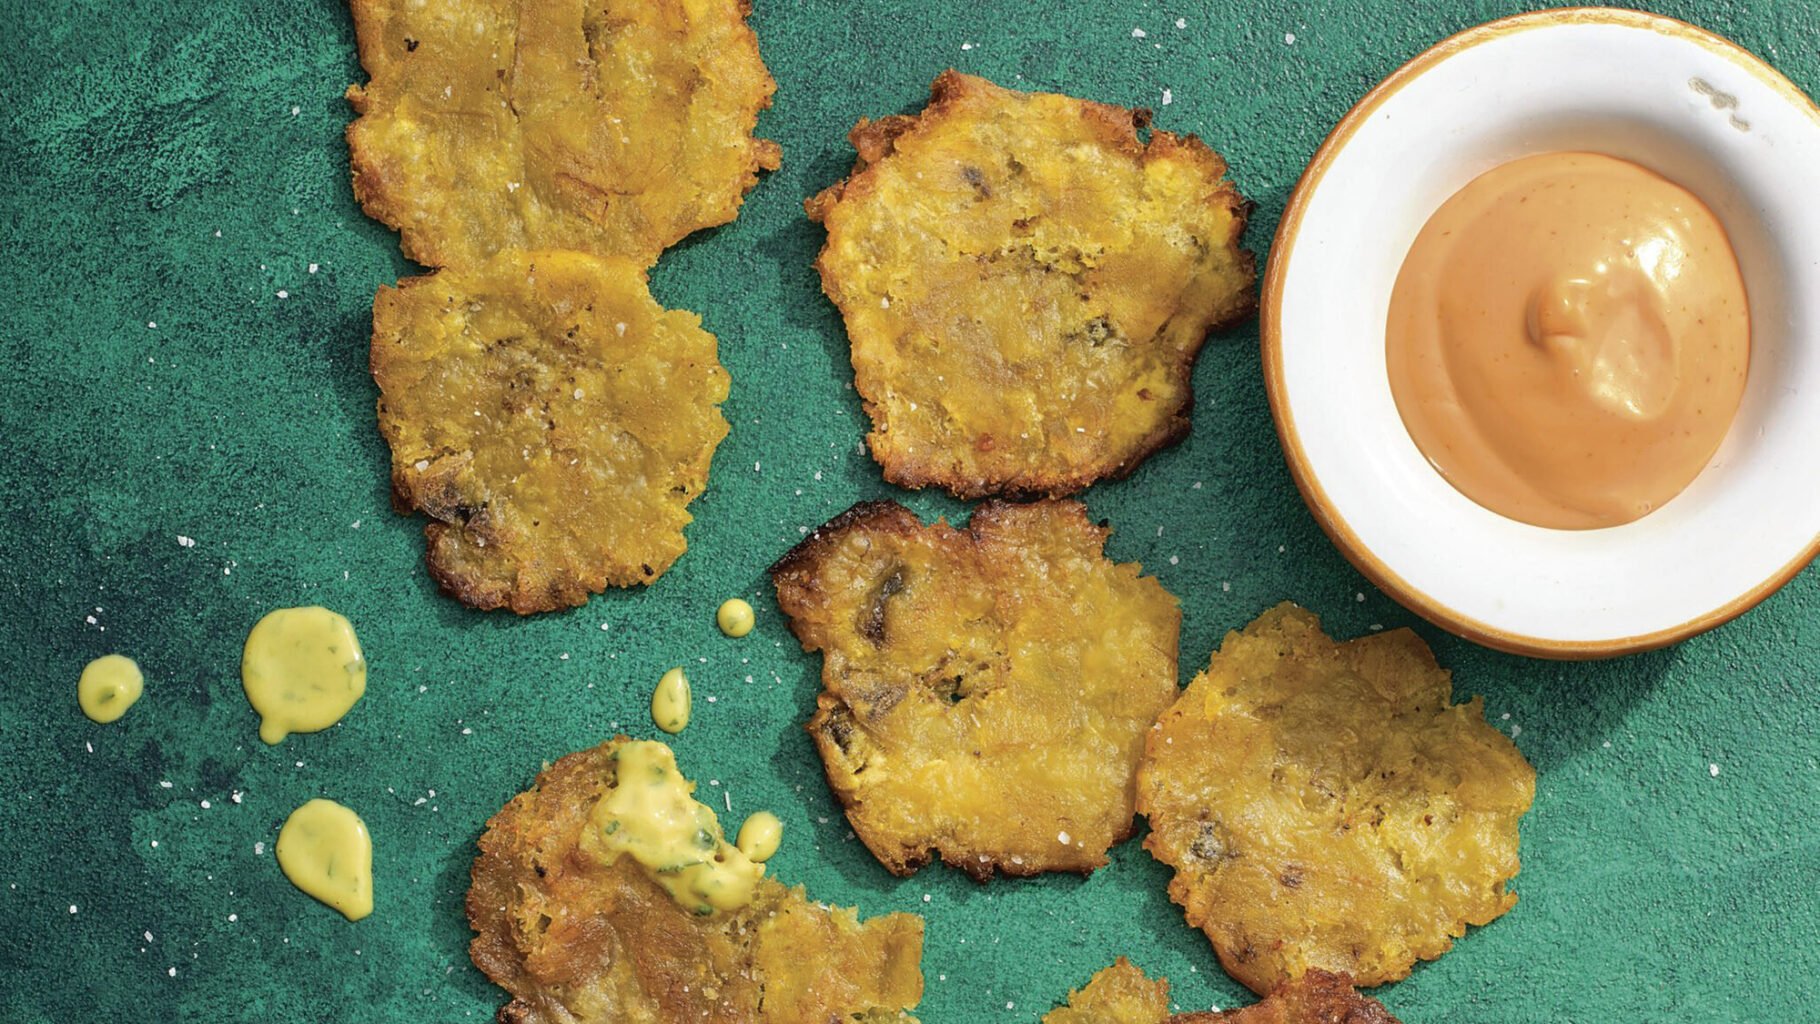 Tostones excerpted from Diasporican: A Puerto Rican Cookbook by Illyanna Maisonet.